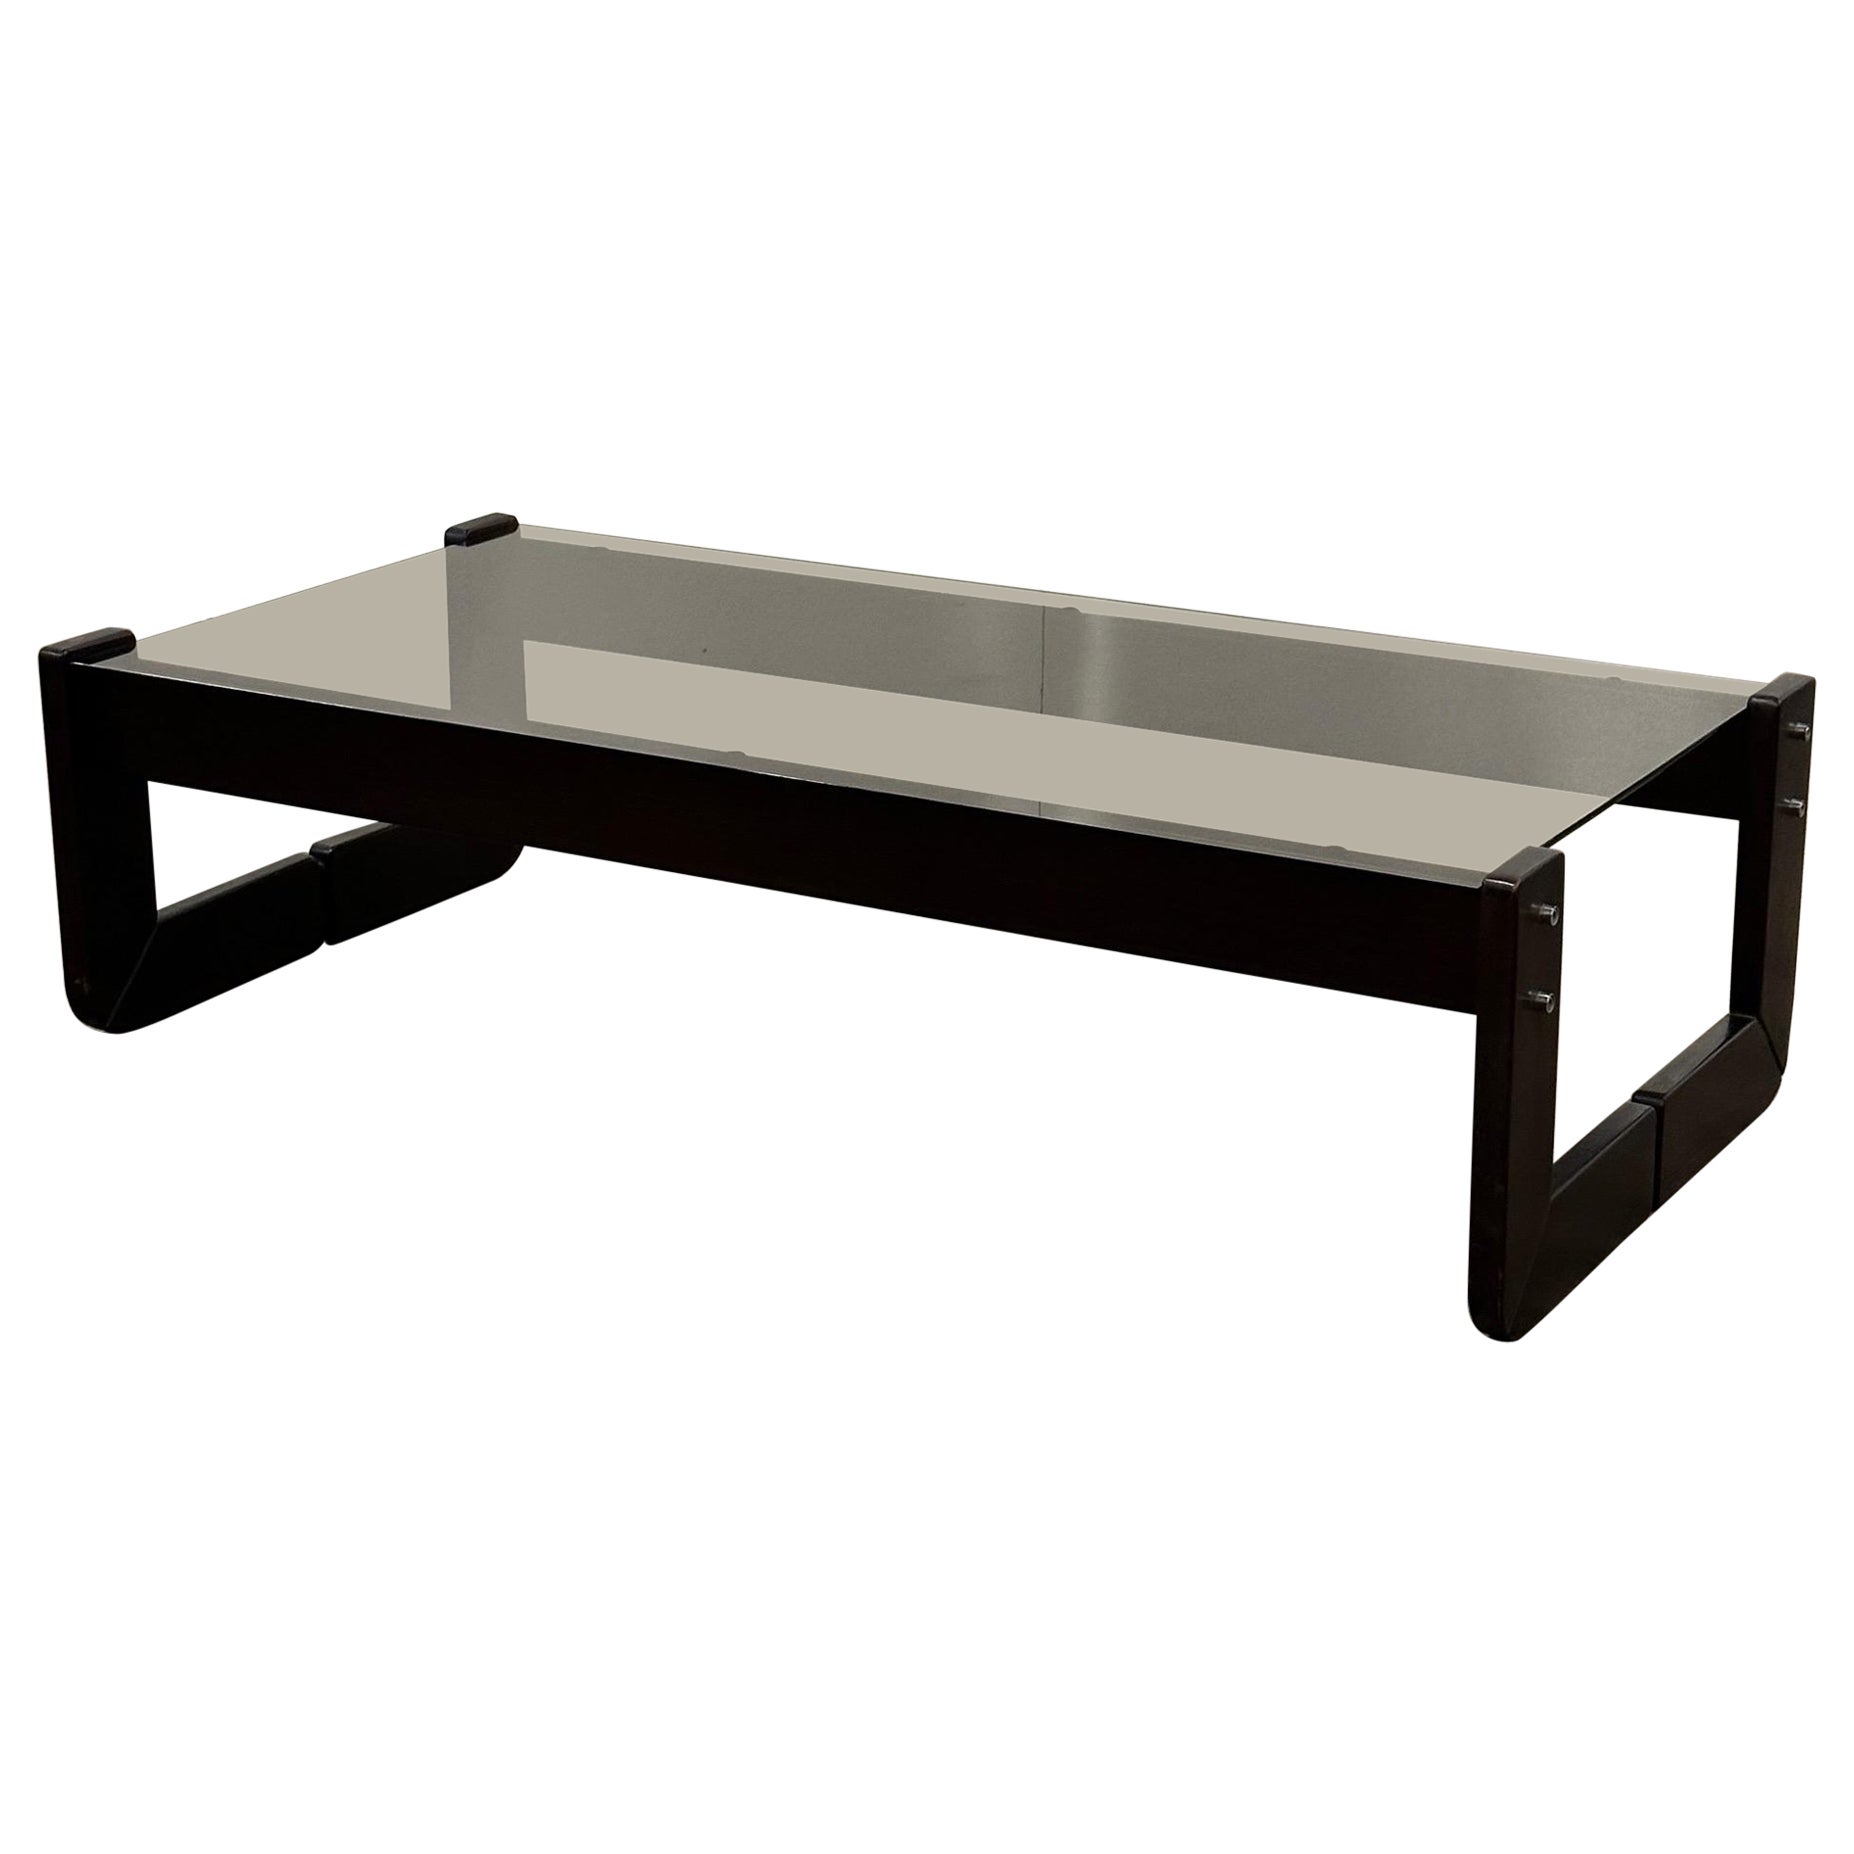 Brazilian Smoked Glass Coffee Table by Percival Lafer For Sale